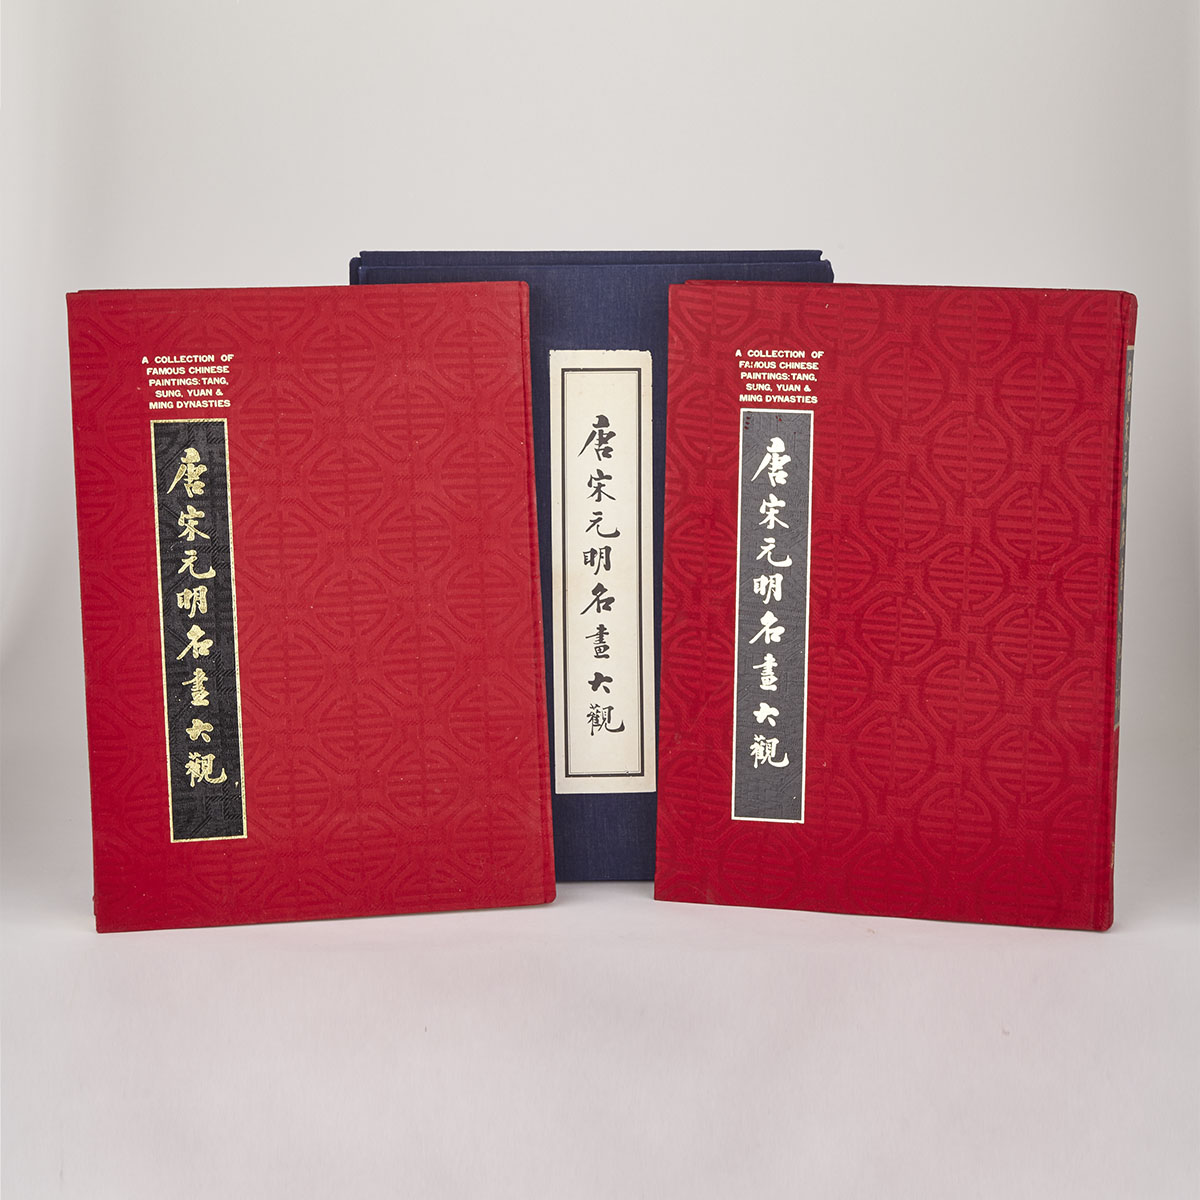 Selected Painting and Calligraphy from Tang Song Yuen Ming Dynasty, 2 Volumes, 1976